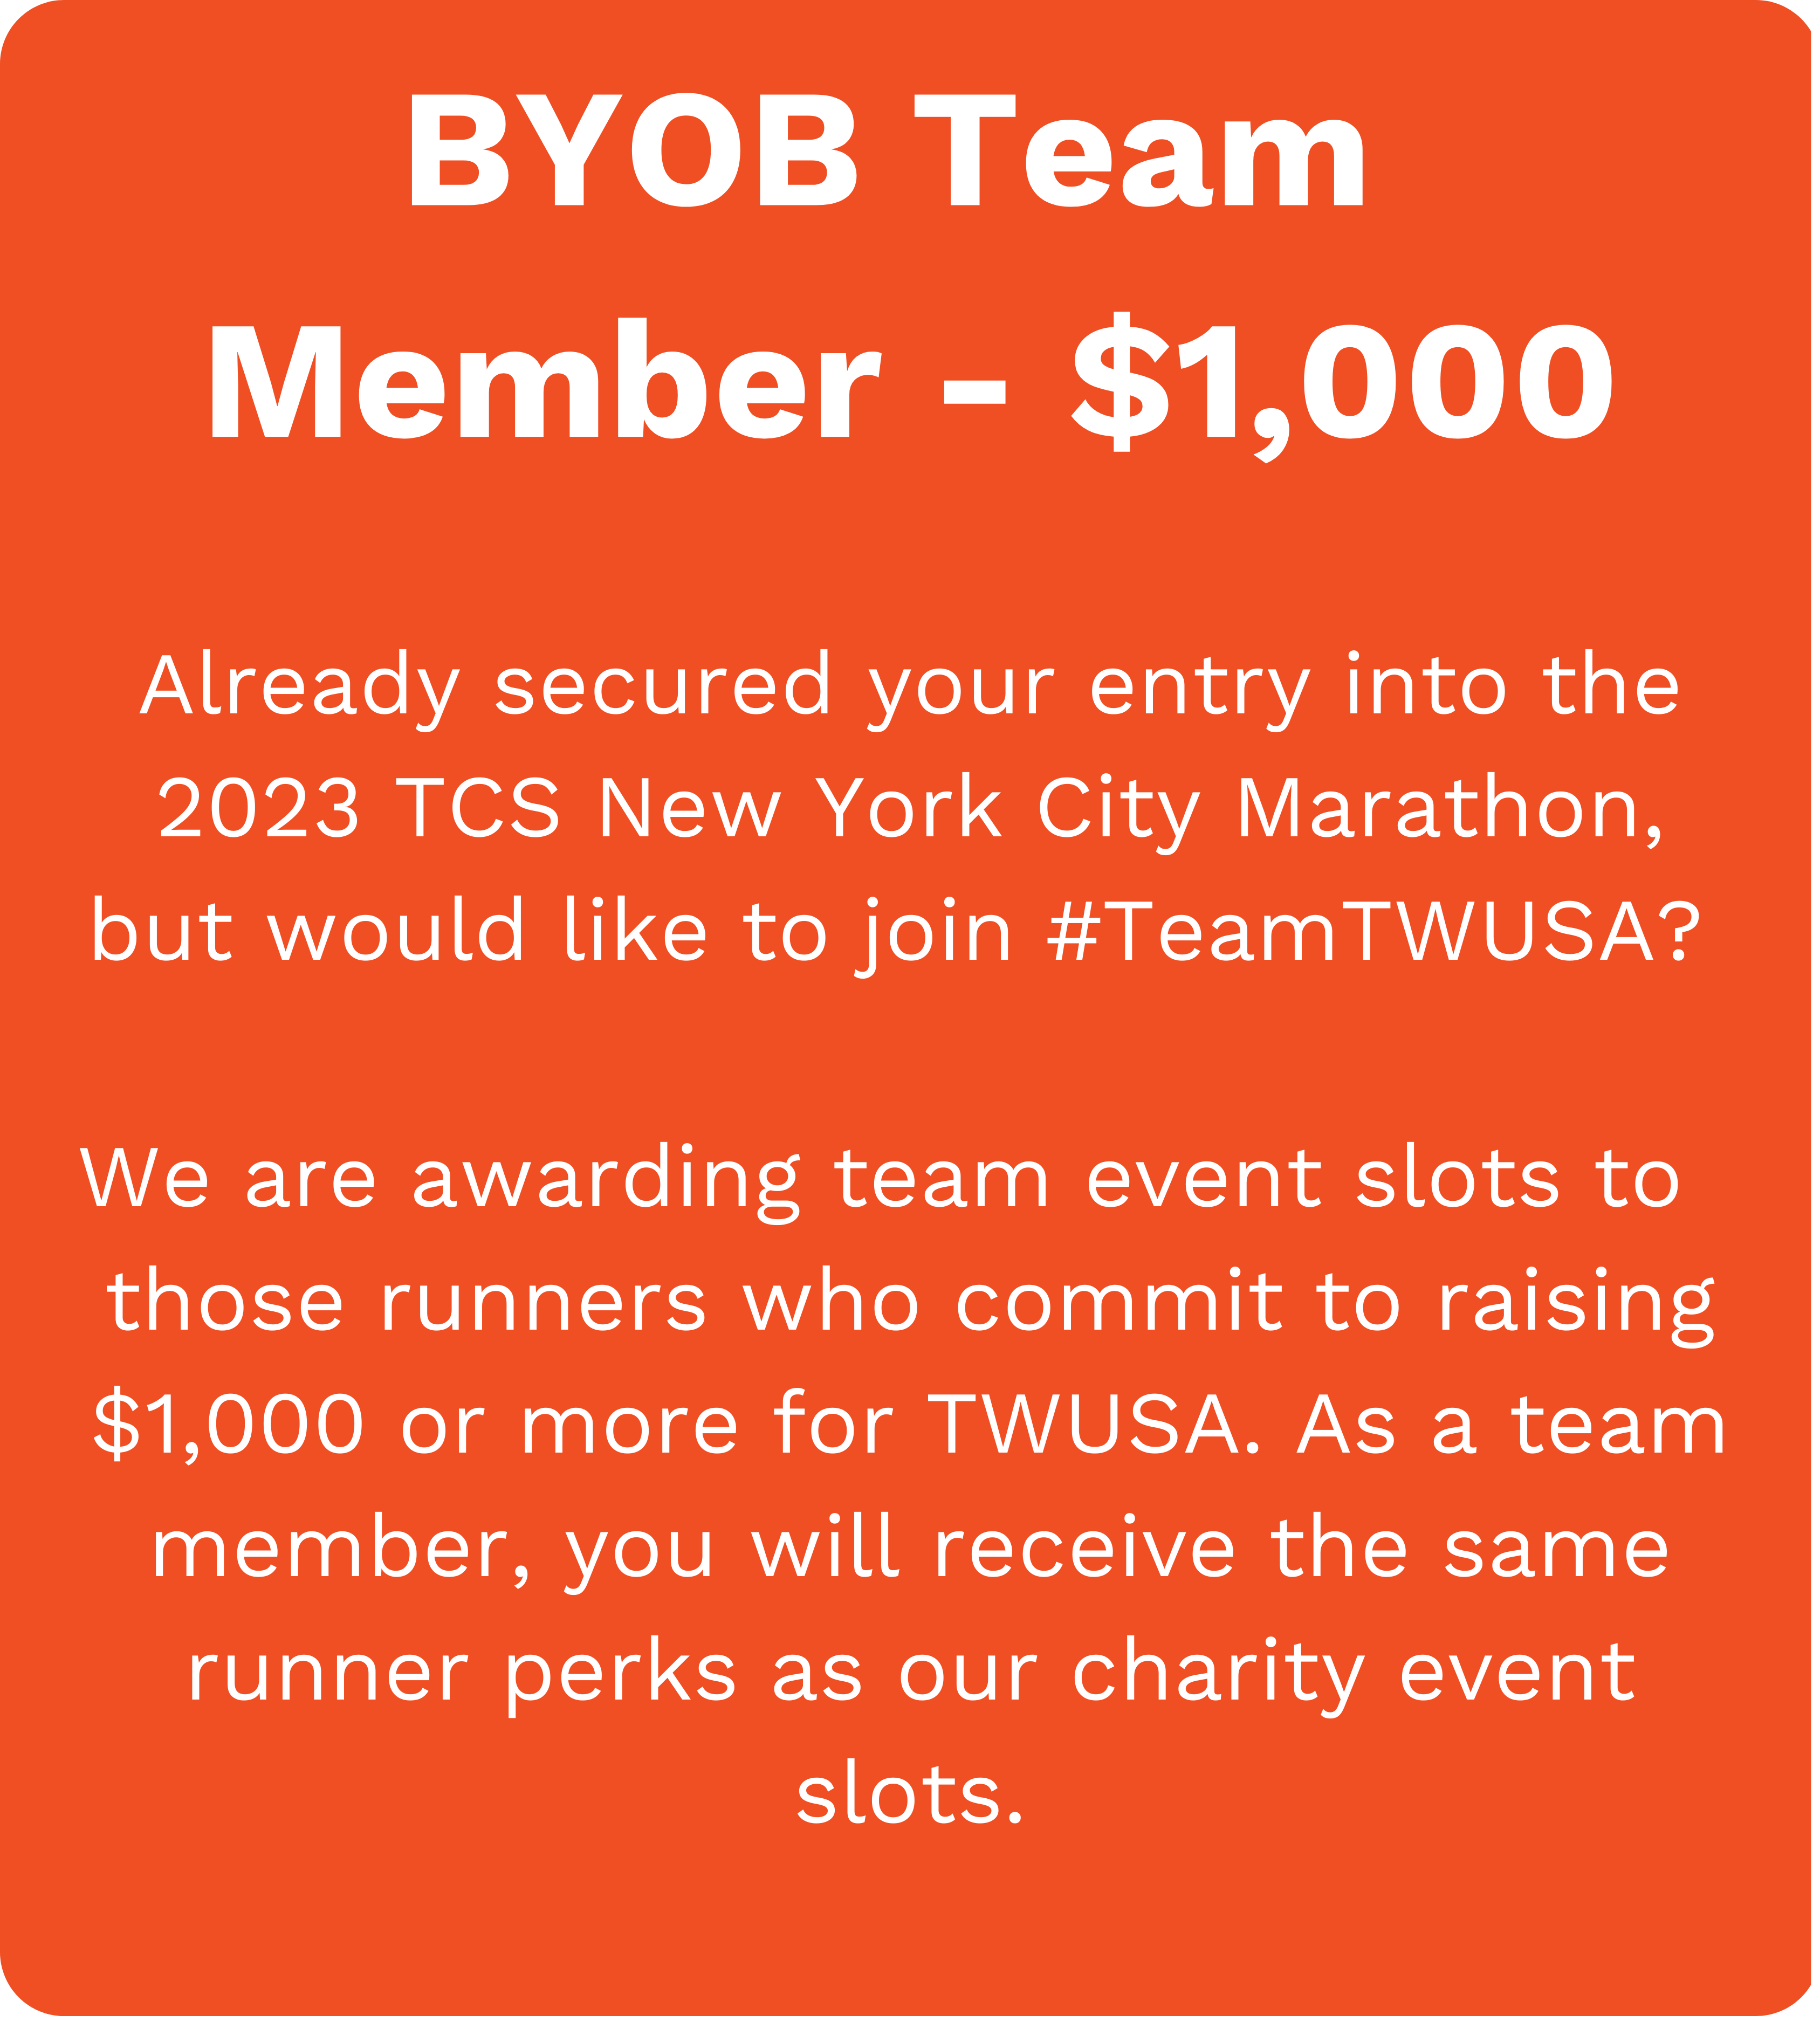 BYOB Team Member - $1,000. Already secured your entry into the 2023 TCS New York City Marathon, but would like to join #TeamTWUSA? We are awarding Team Event Slots to those runners who commit to raising $1,000 or more for TWUSA. As a team member, you will receive the same runner perks as our Charity Event Slots.